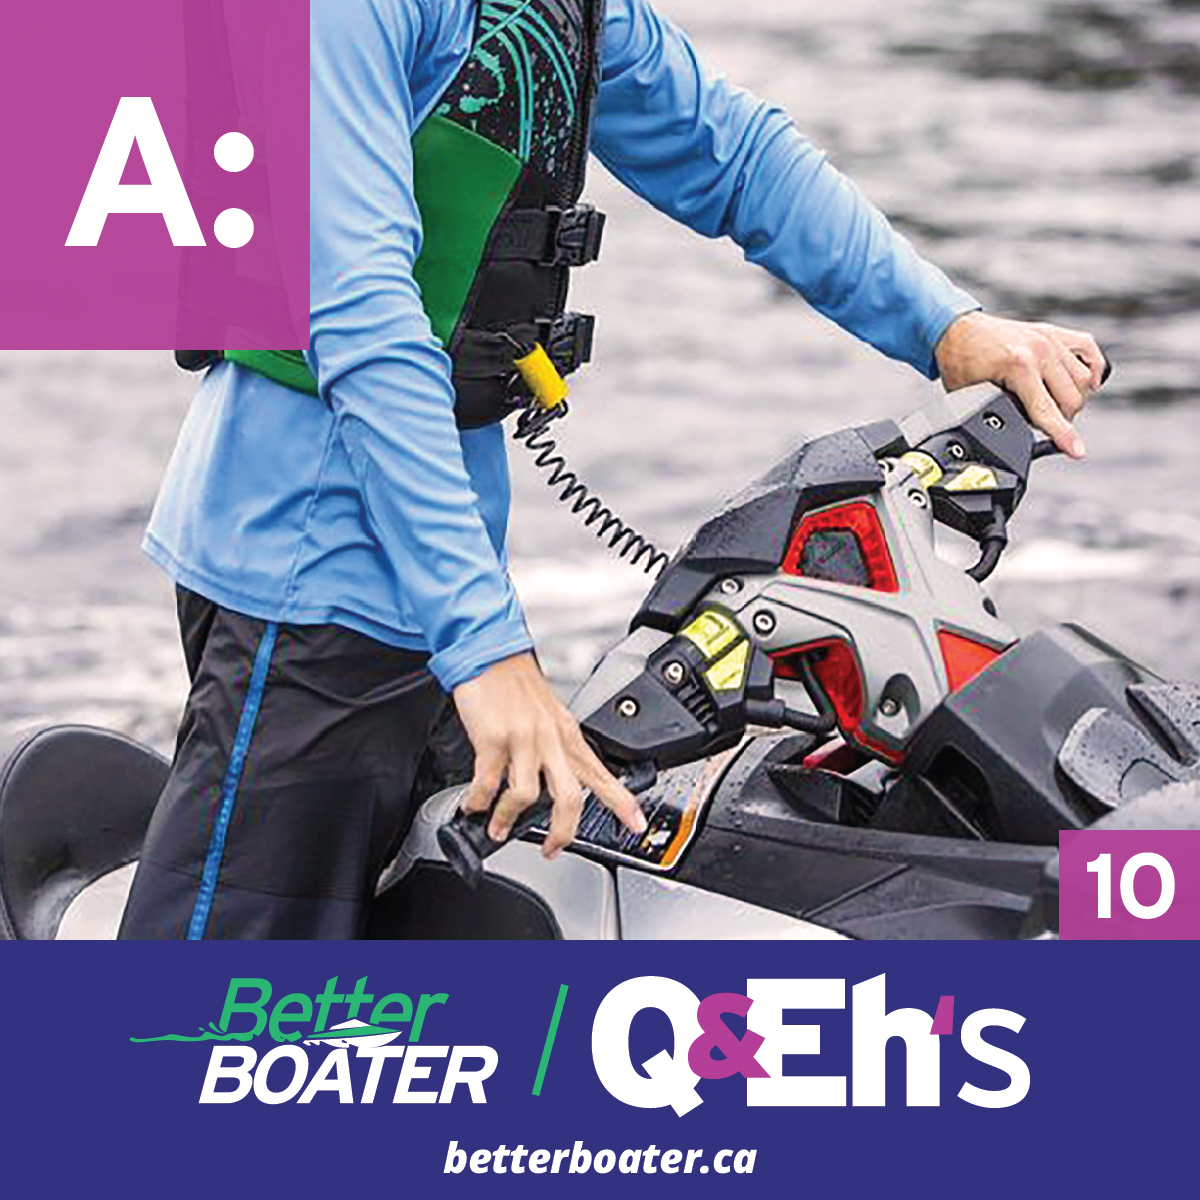 https://betterboater.ca/Safety%20Lanyard